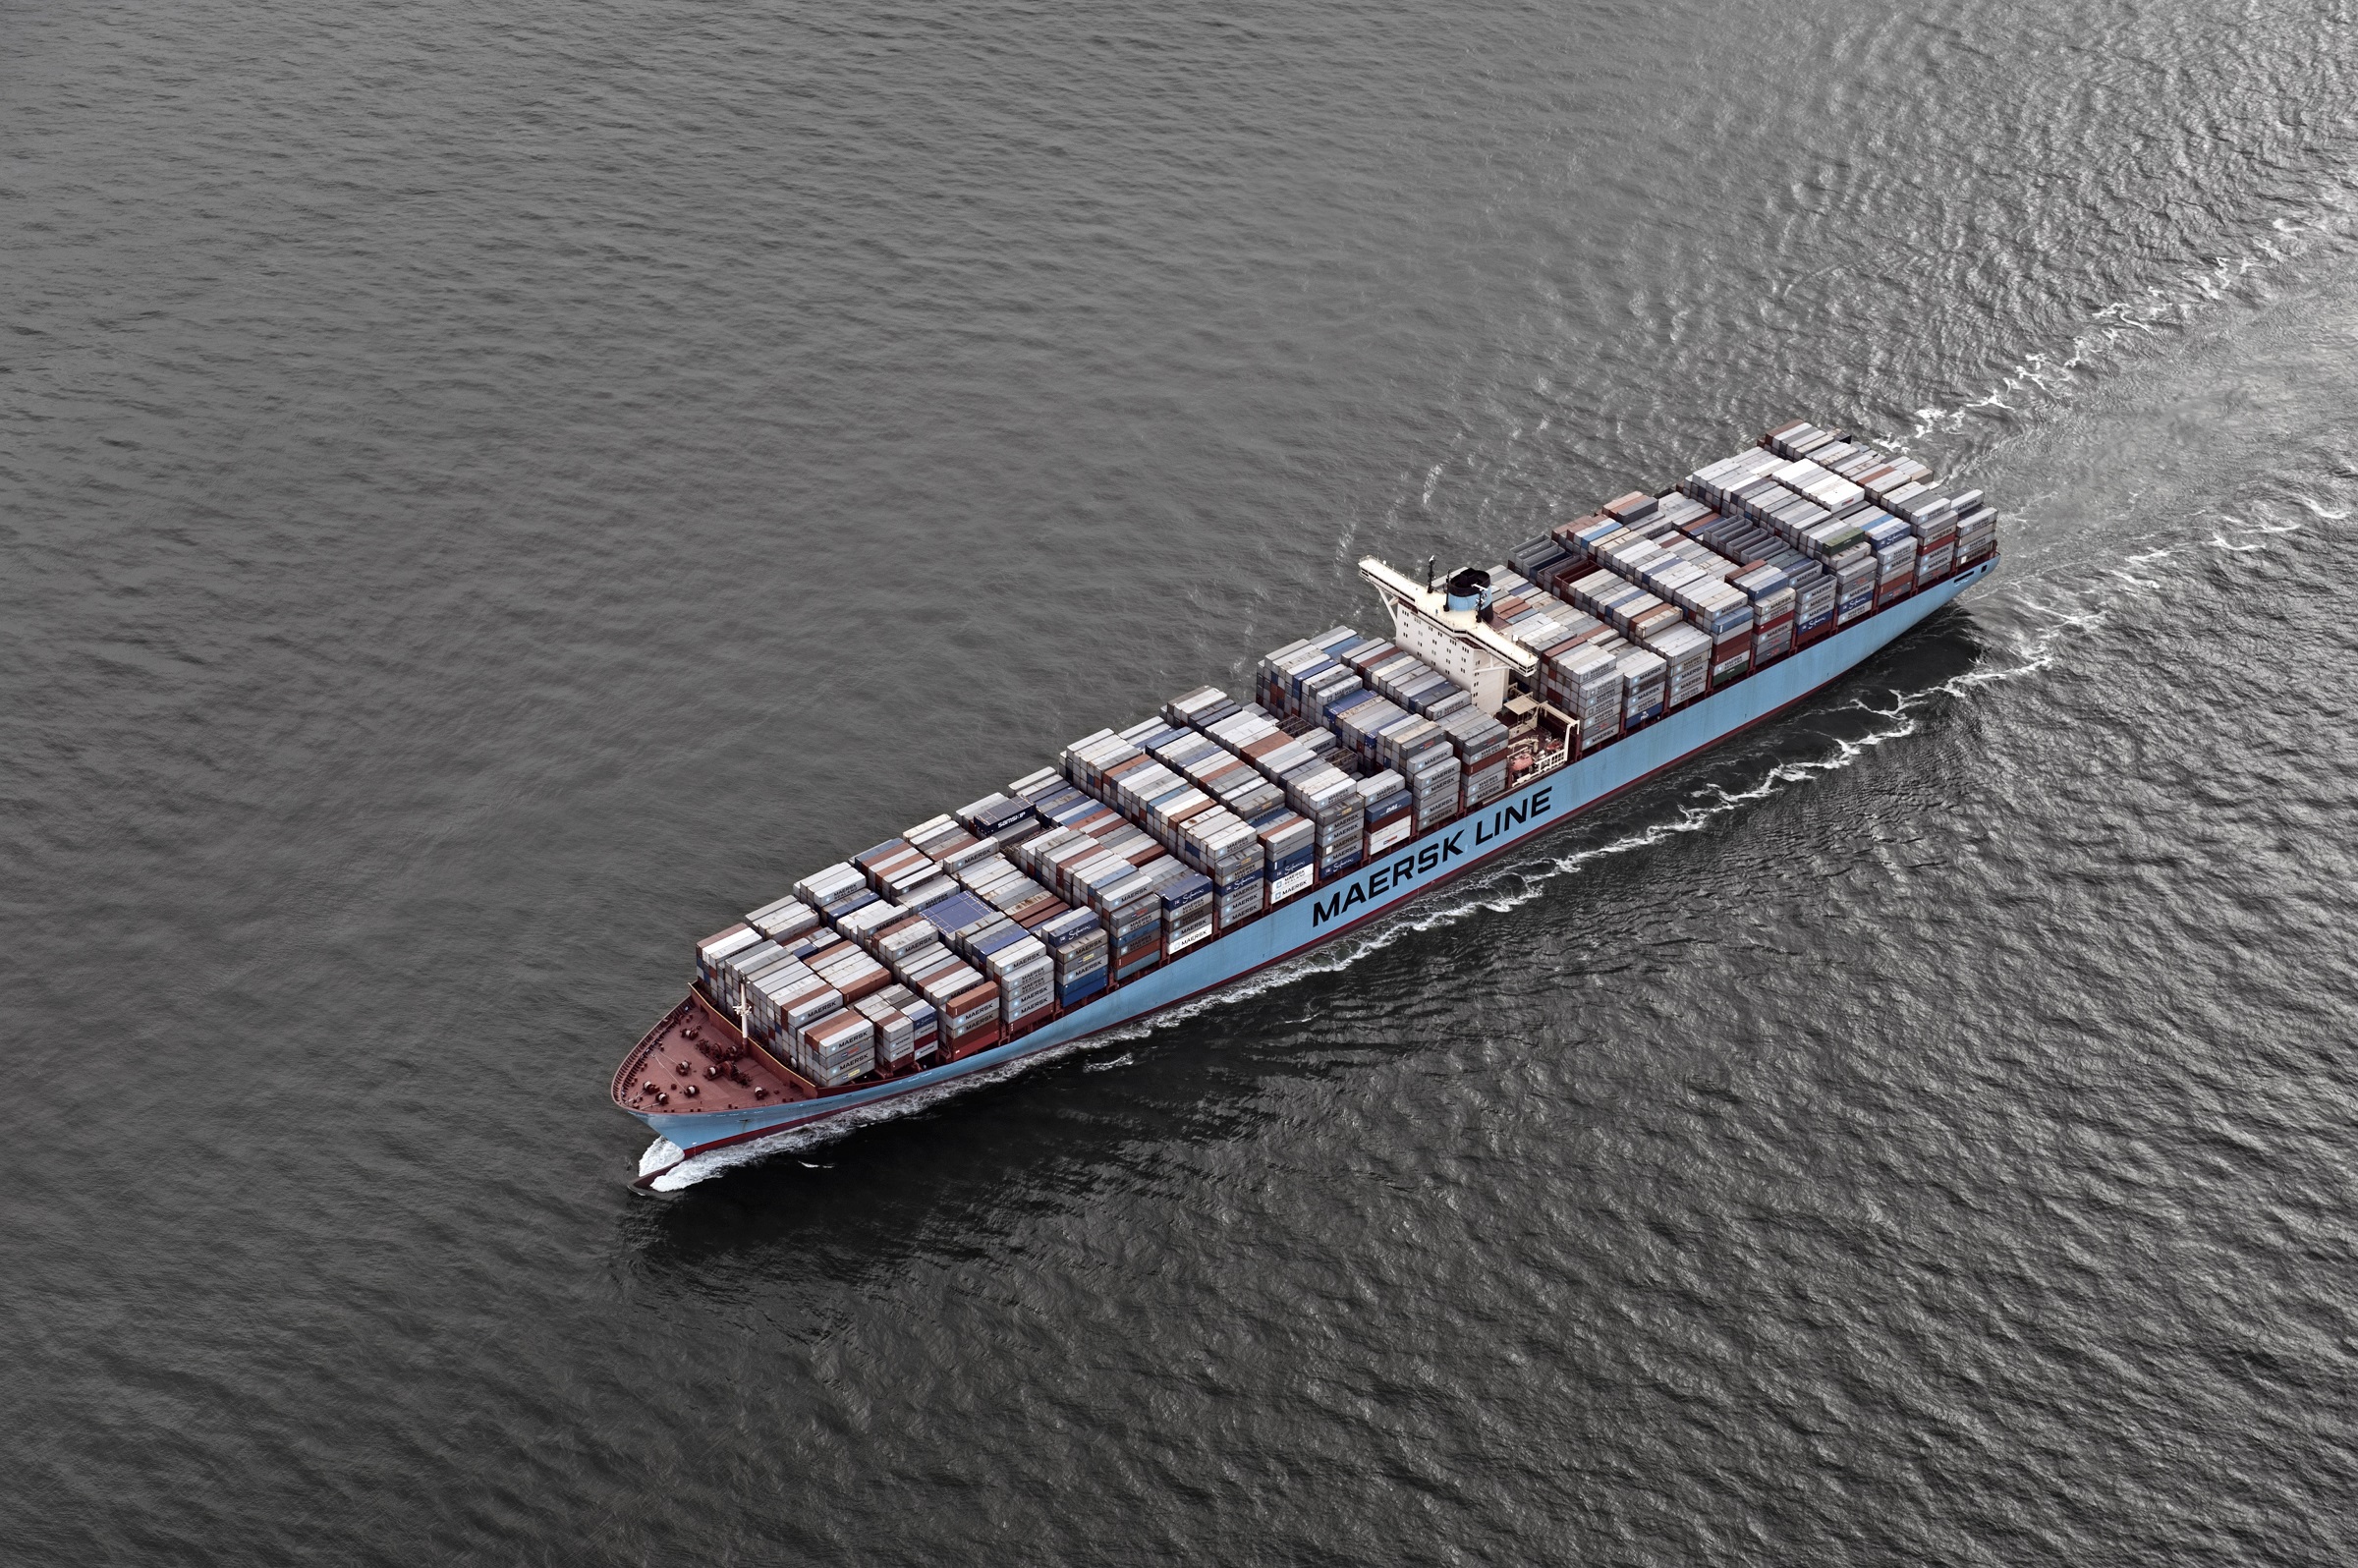 Maersk Loss Short-lived: Higher Q2 Container Rates